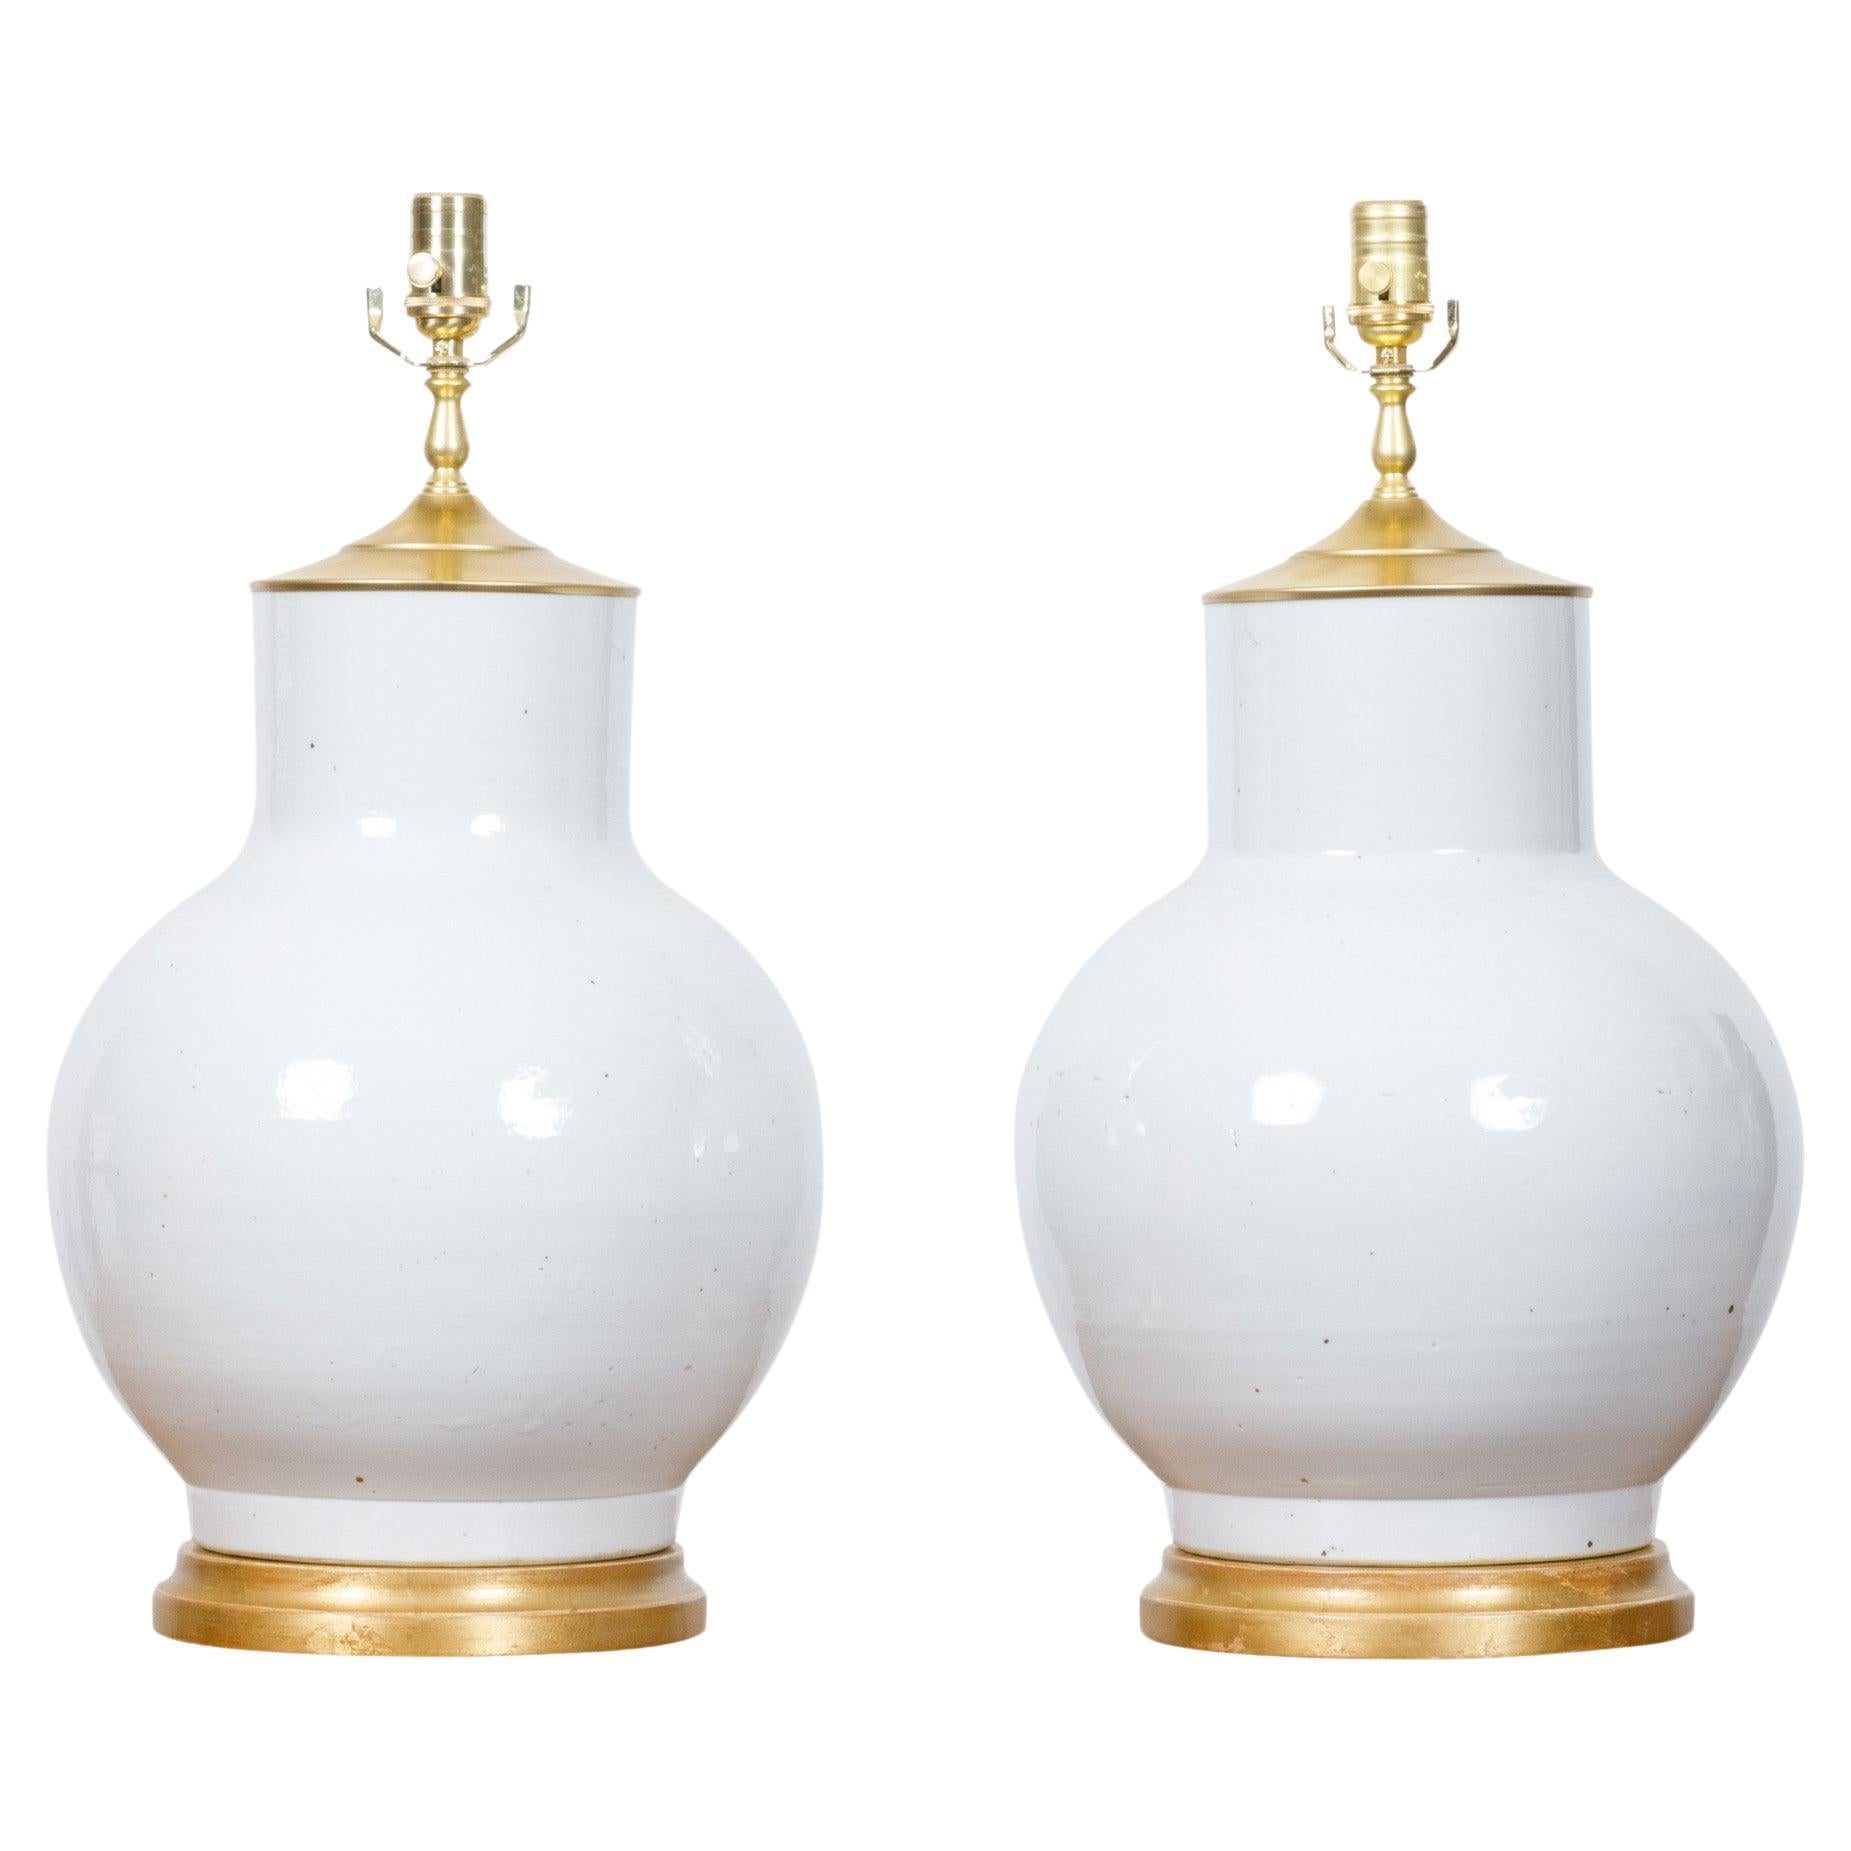 Pair of White Porcelain Vases Made into US-Wired Table Lamps on Giltwood Bases